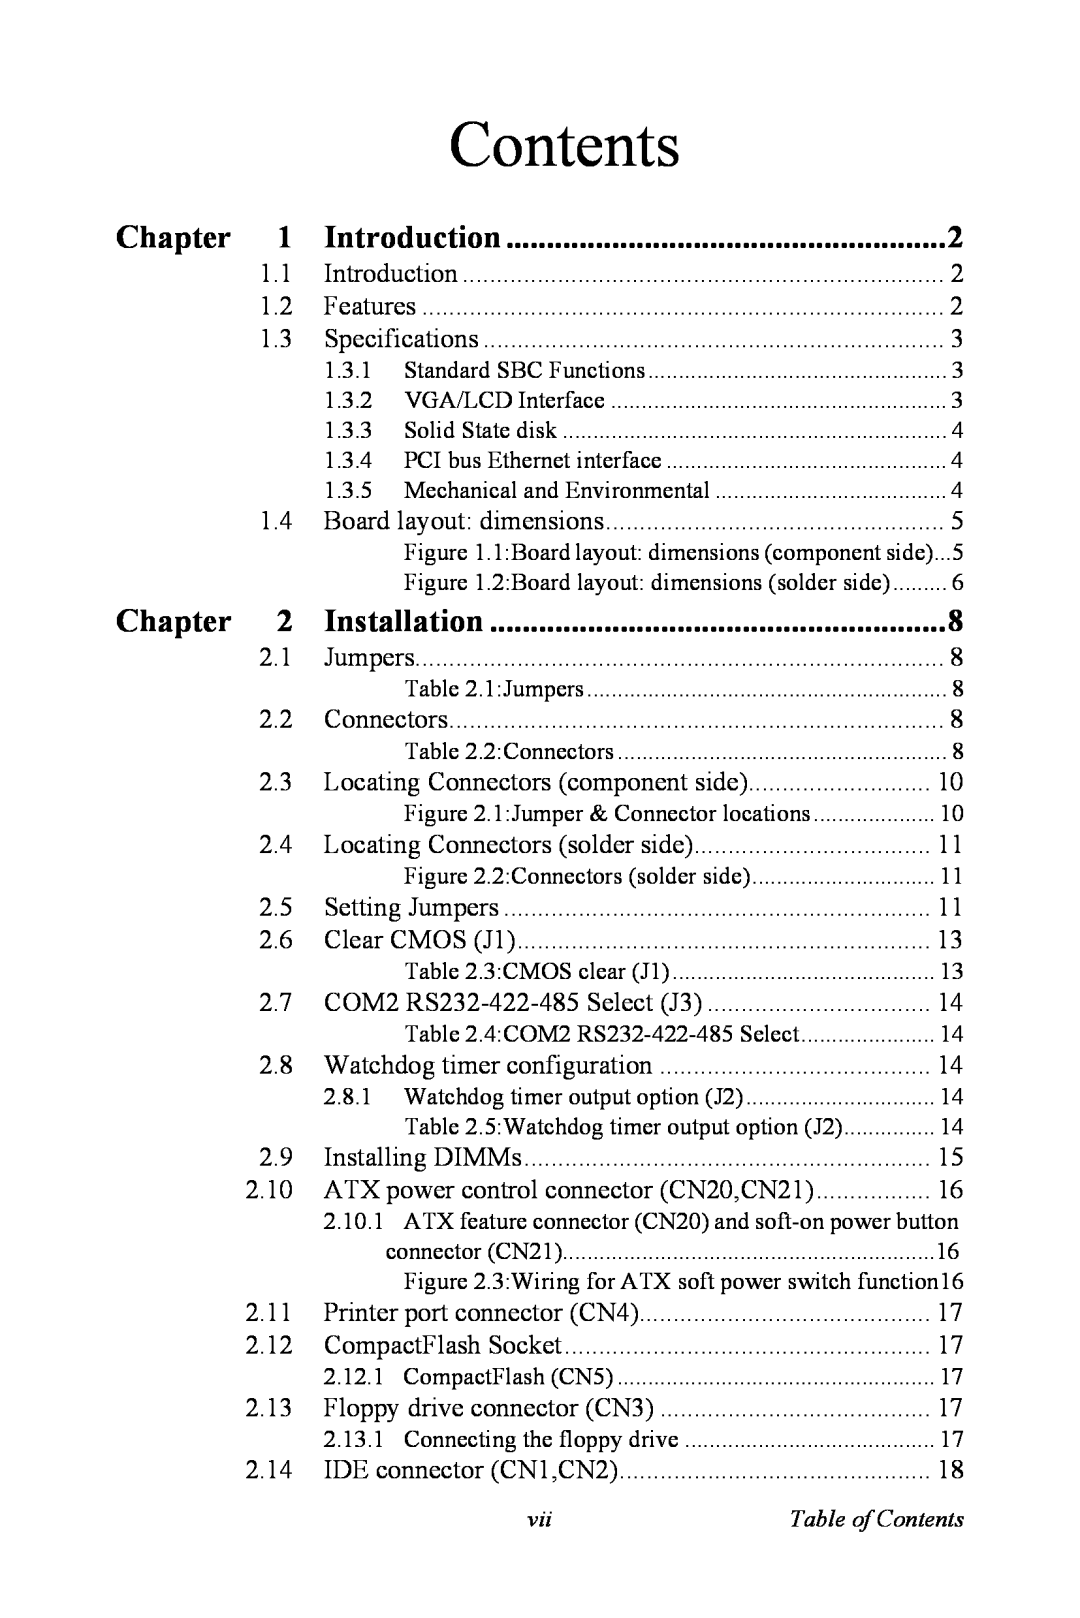 Advantech PCA-6774 user manual Chapter, Introduction, Contents, Installation 